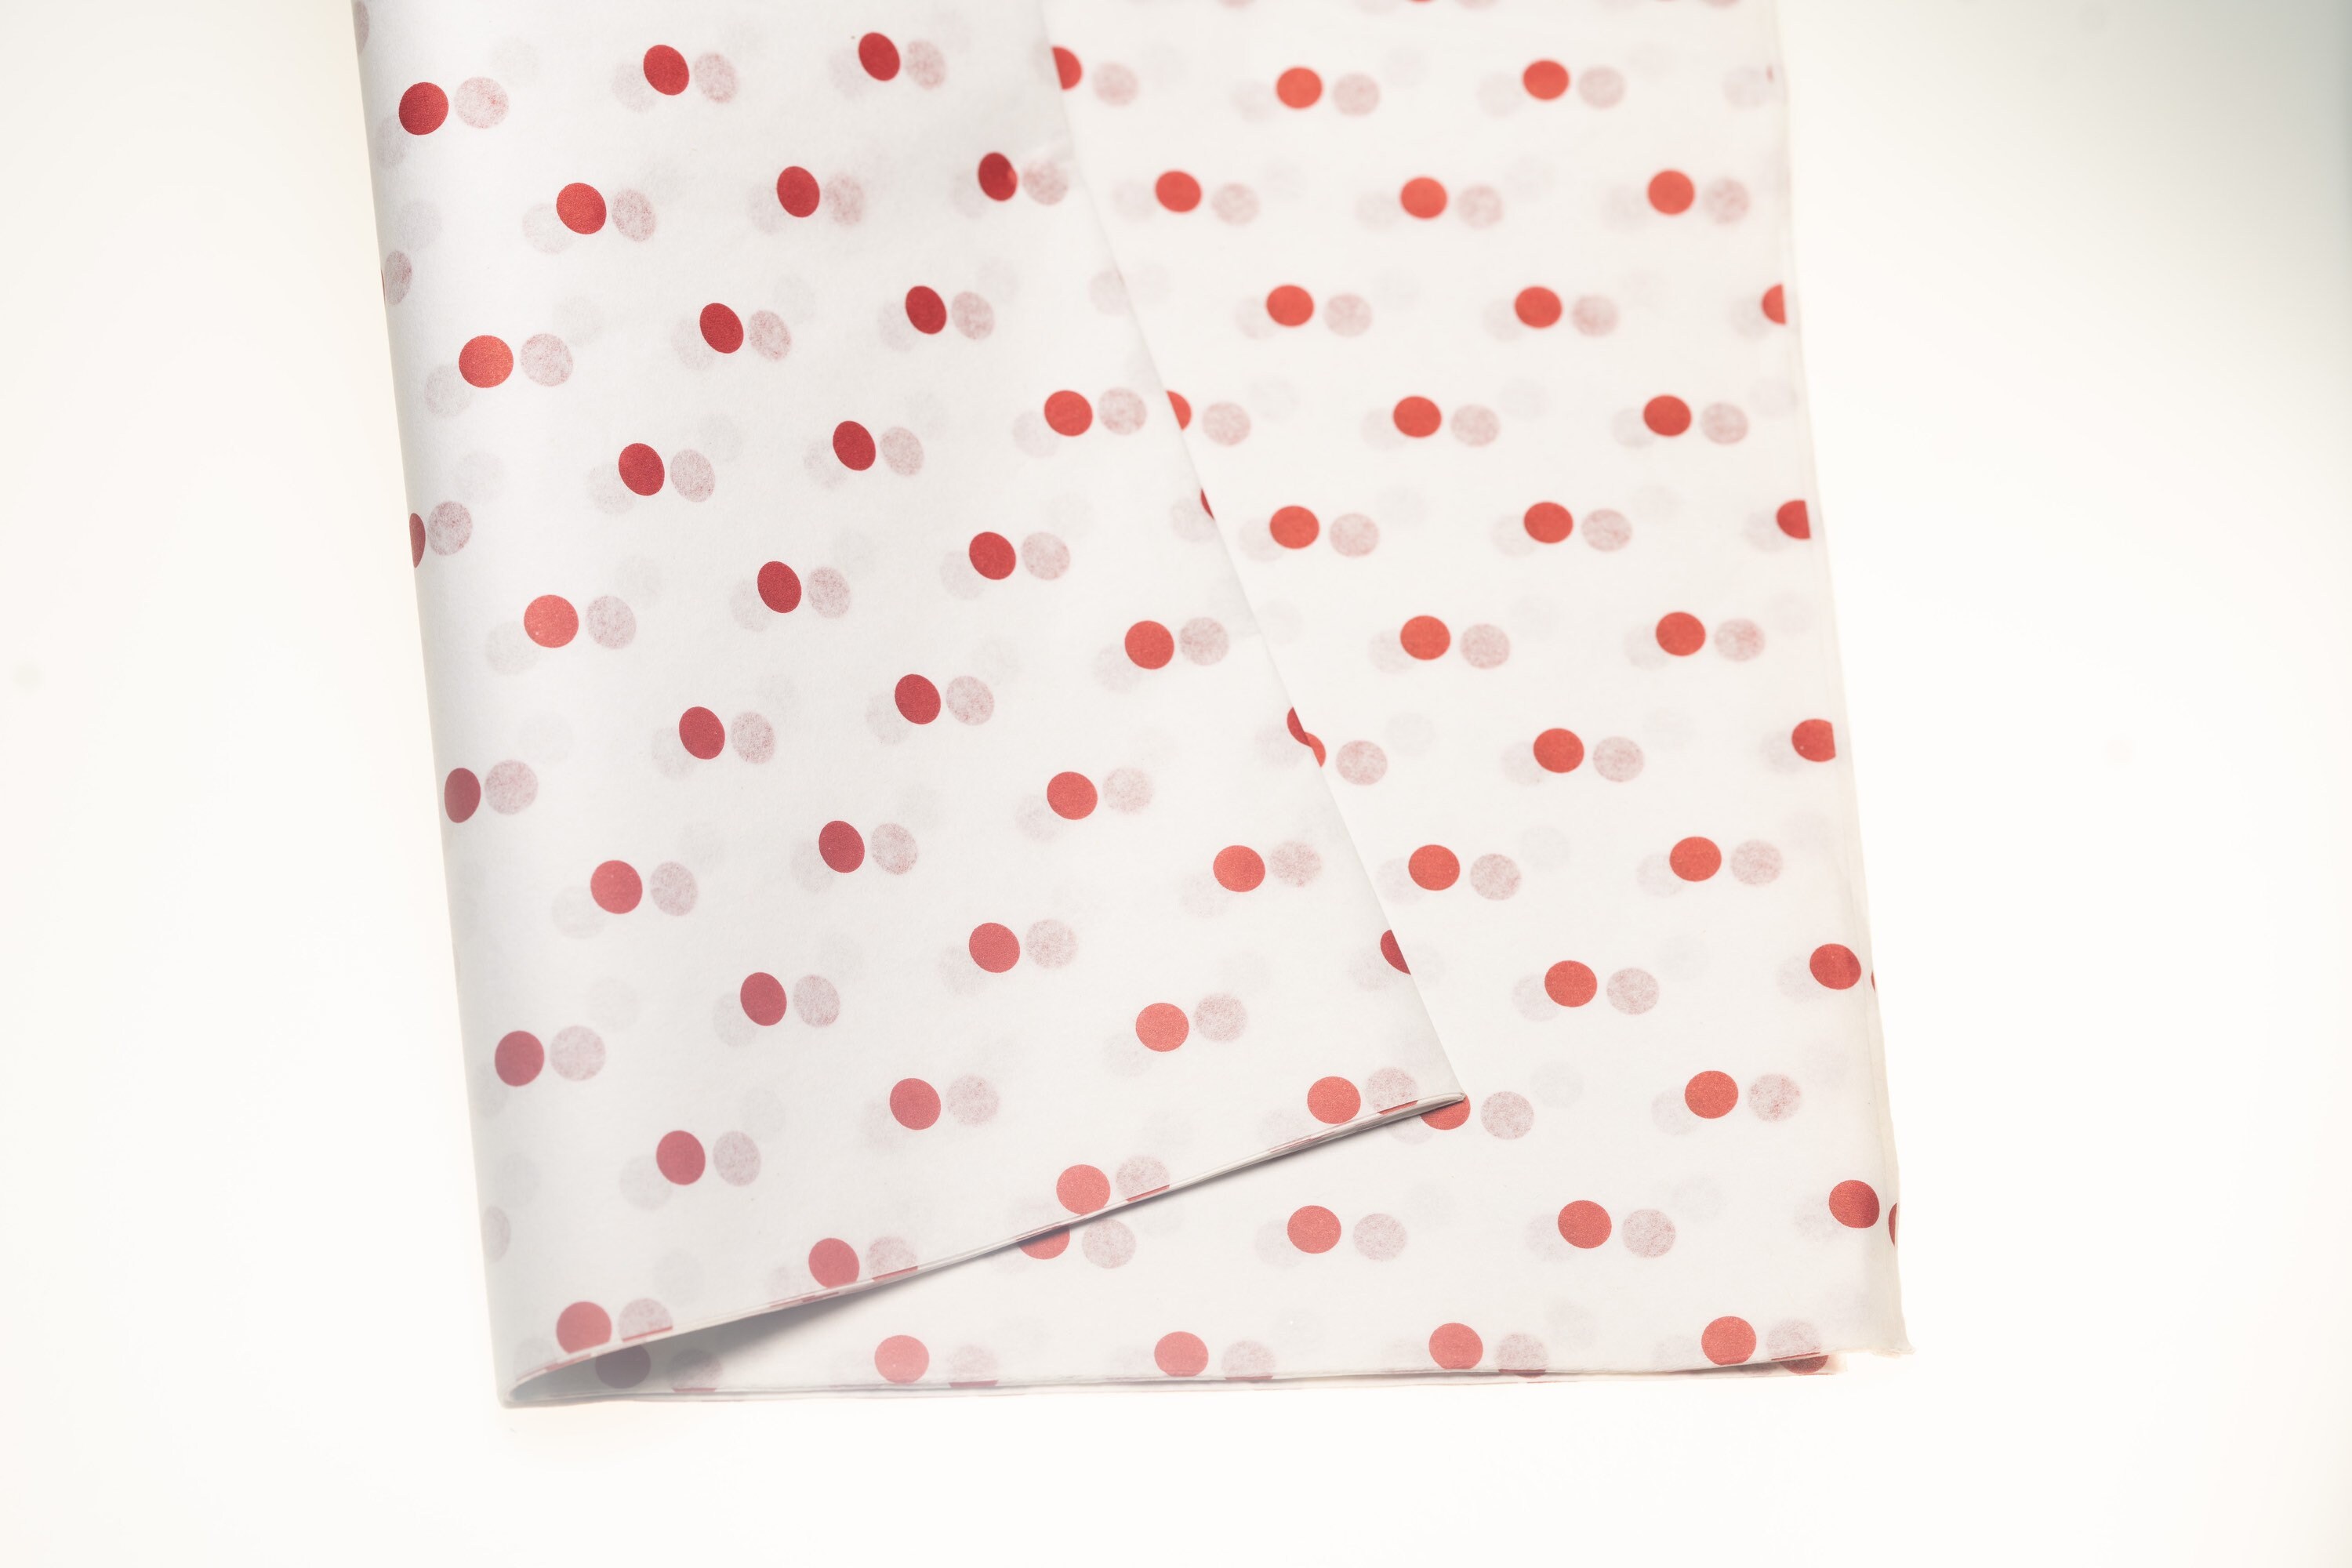 Red Dots Tissue Paper